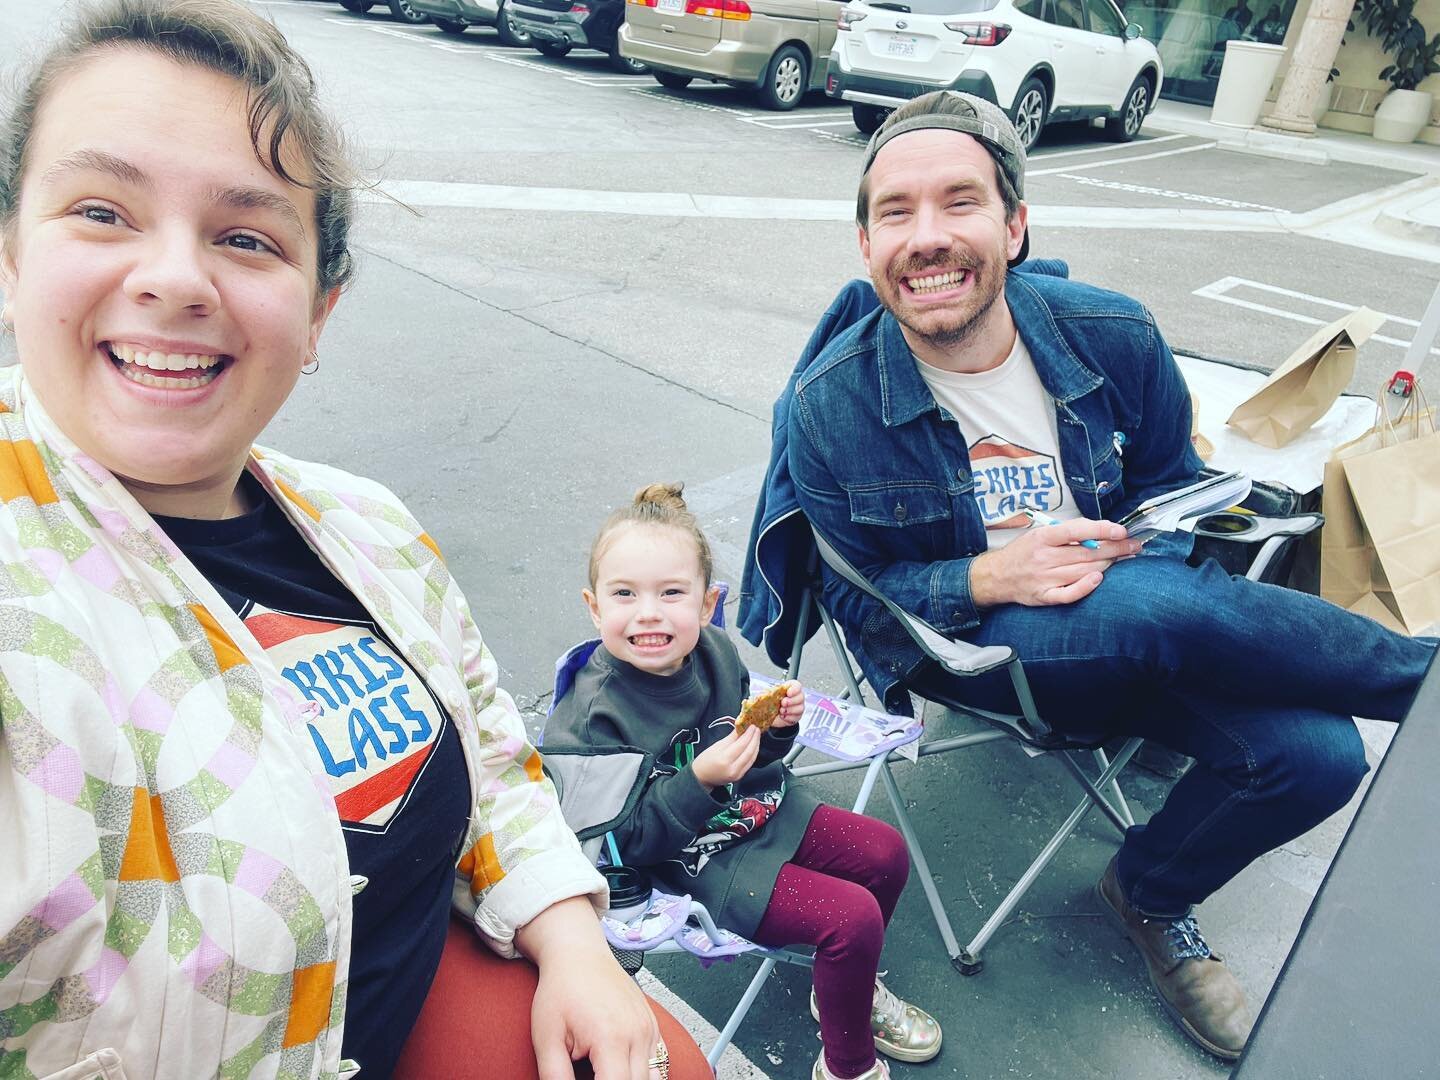 Another family day selling glass at @flowspaceoc ✨ Grateful to be out and about doing what we love with our favorite kiddo!!